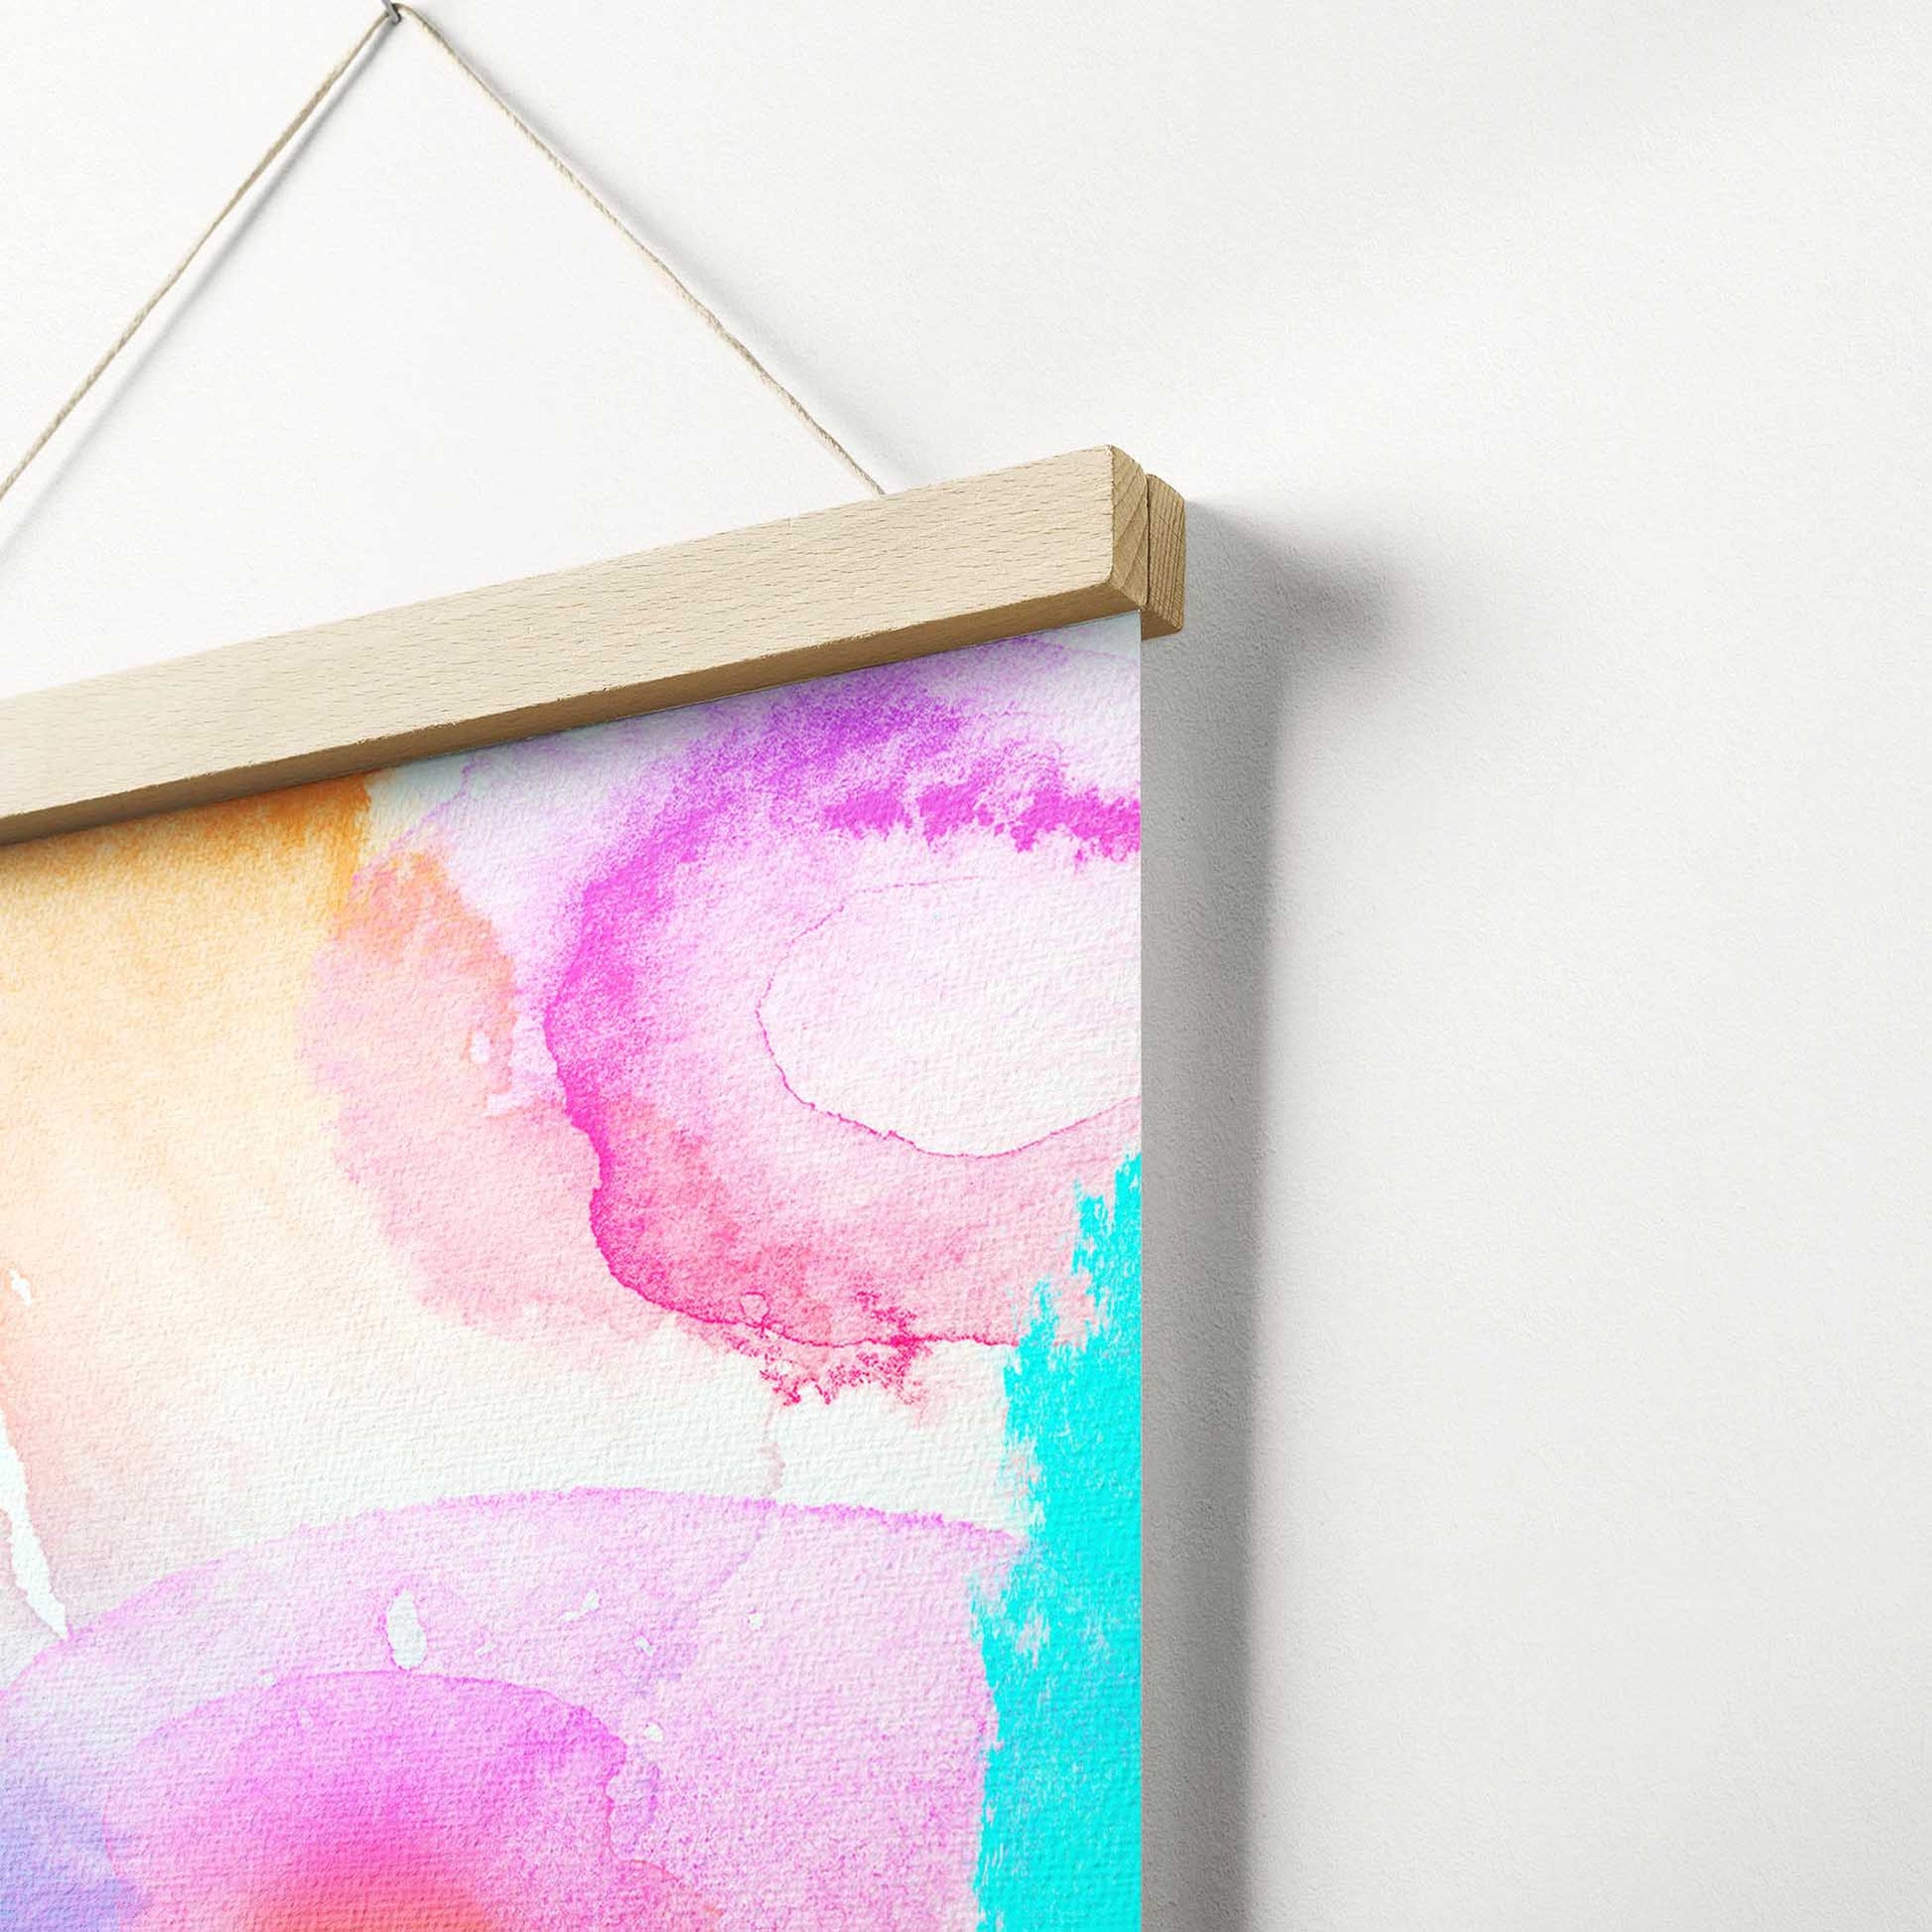 Immerse yourself in the world of artistic expression with our Personalised Blue Engraved Poster Hanger. Printed from your photo, it features an engraved effect with vibrant blue and purple hues, adding a cool and creative touch to your home decor